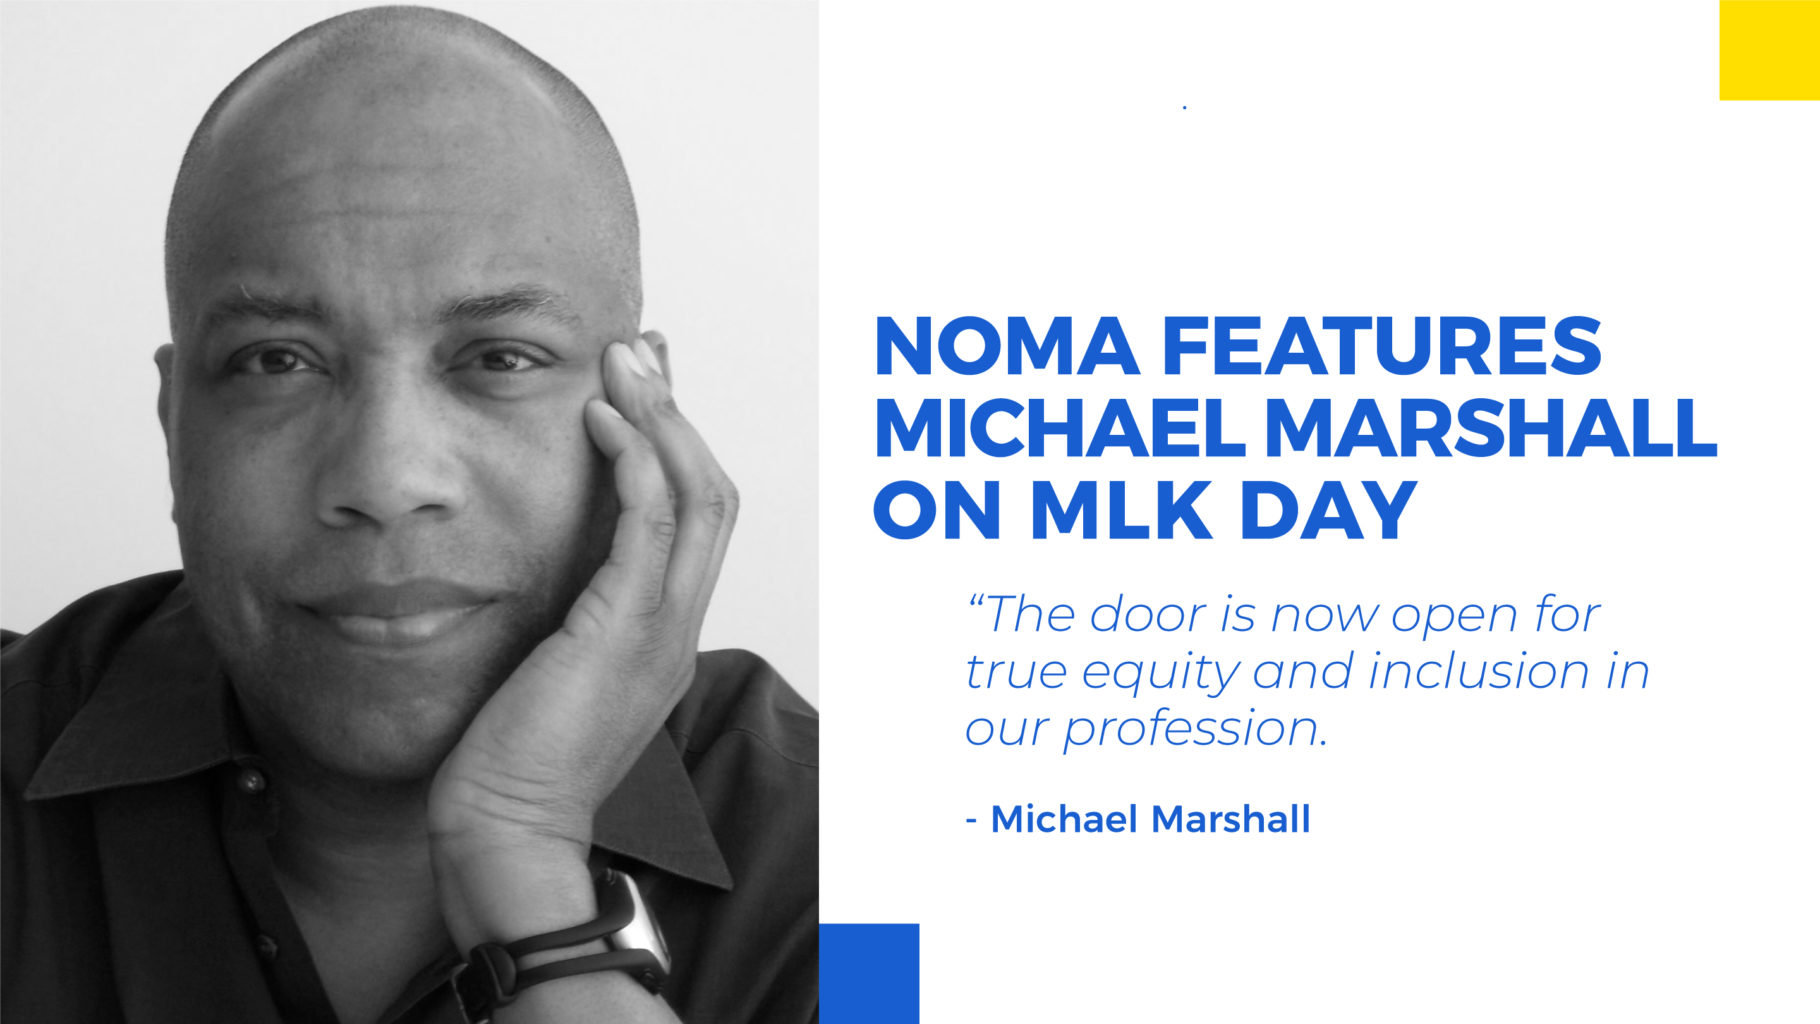 DC NOMA Features Michael Marshall On MLK Day